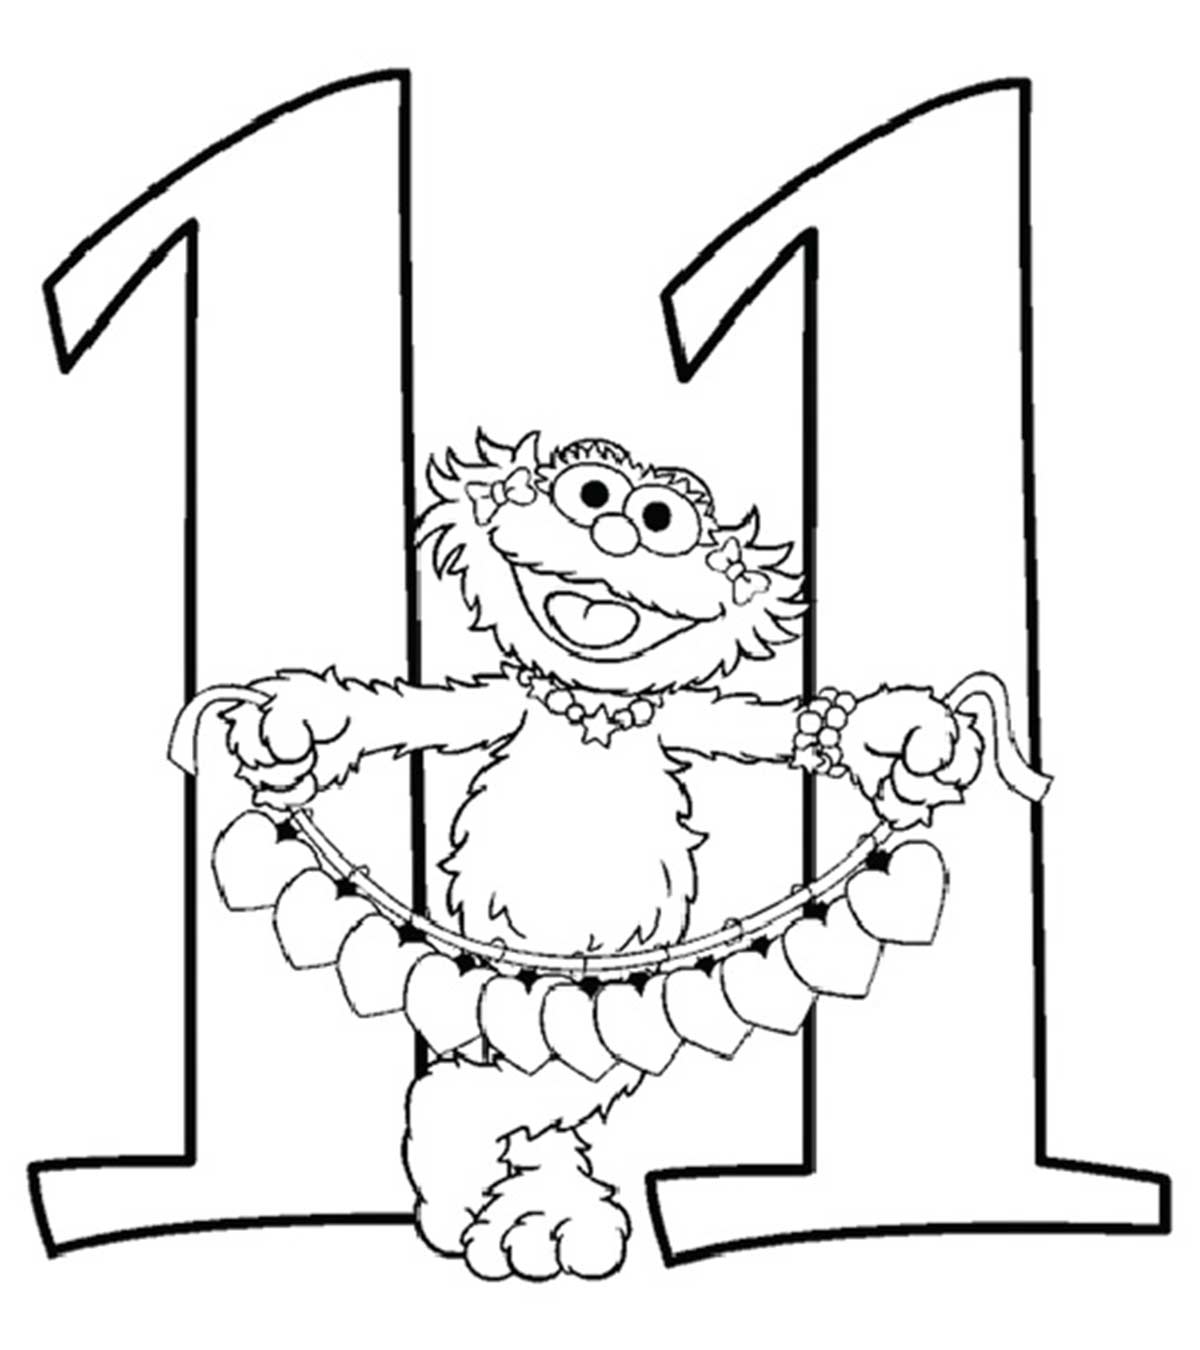 21 Easy To Learn Number Coloring Pages For Your Little Ones_image